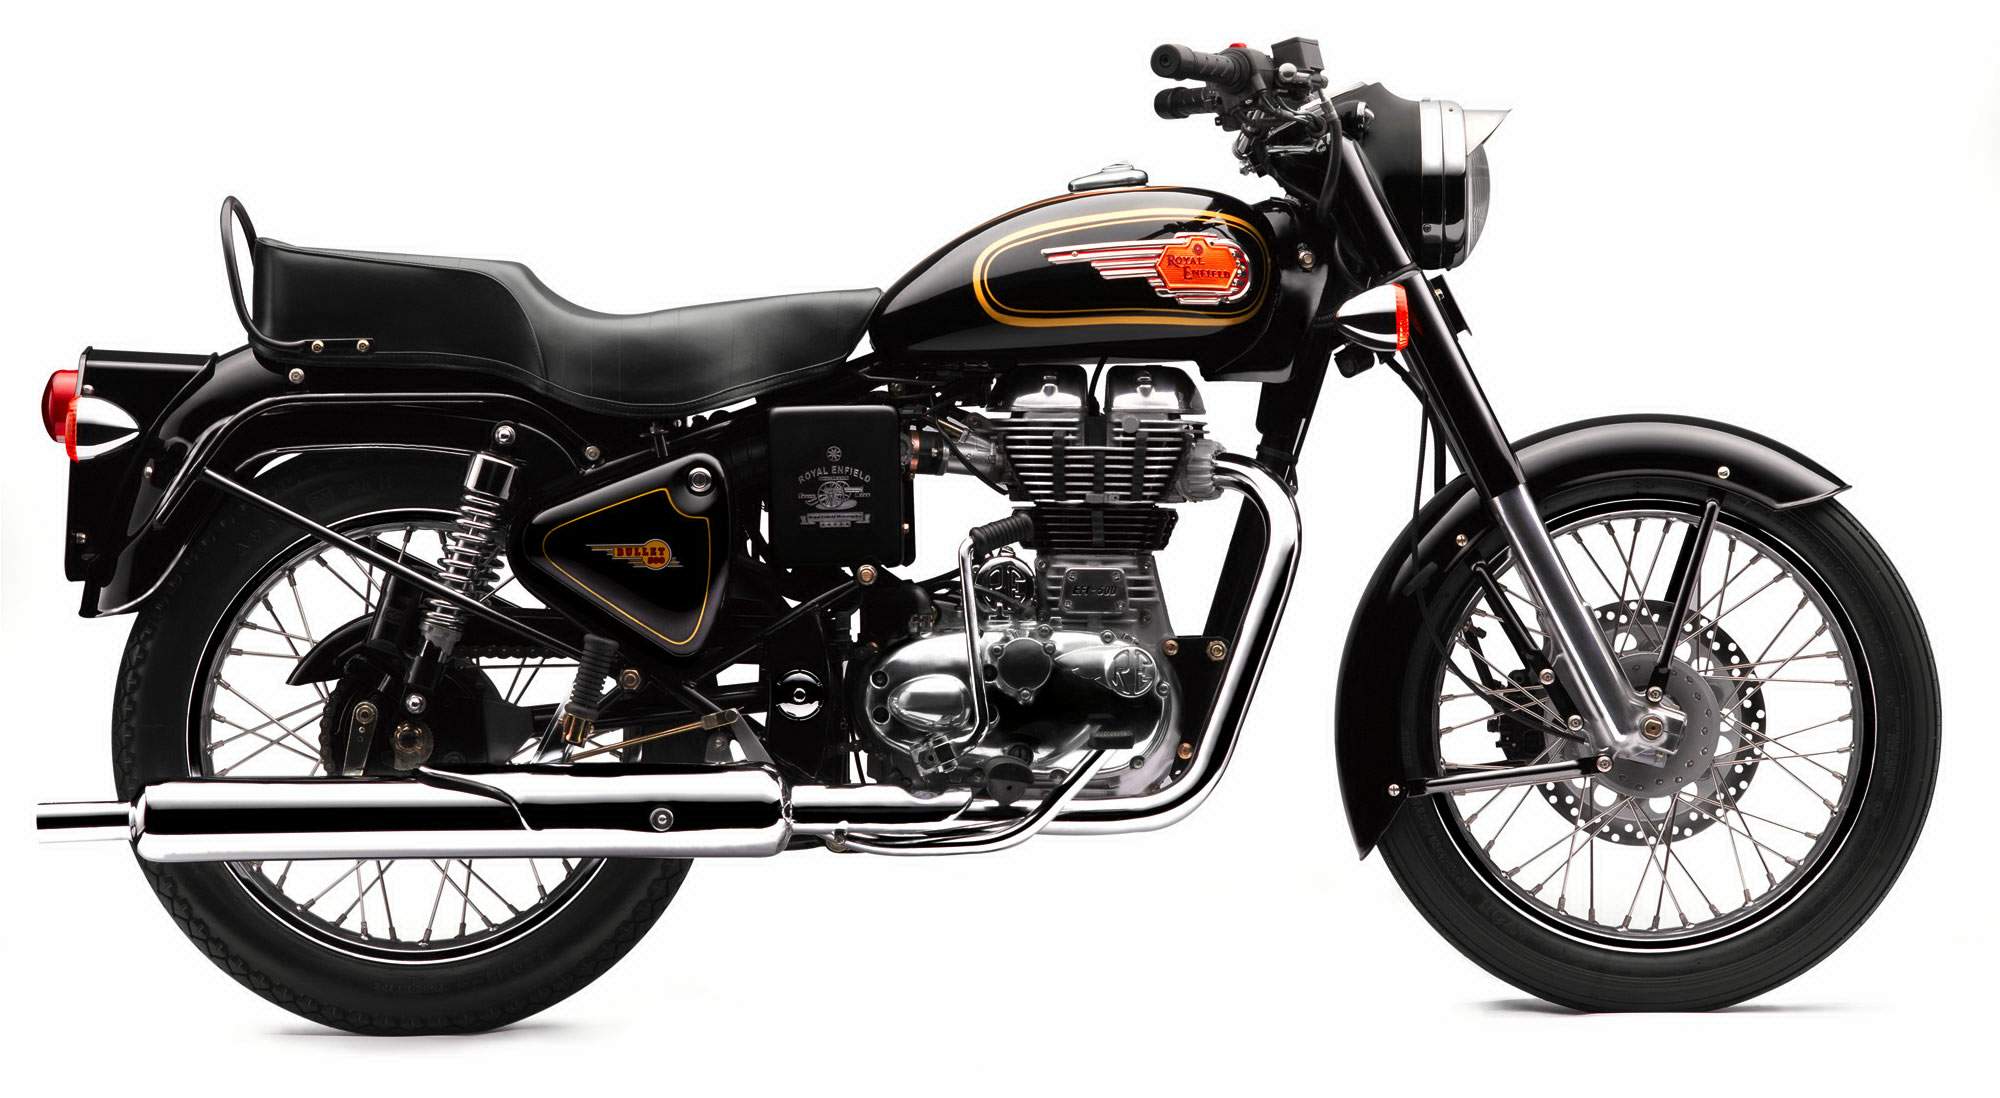 Royal Enfield Bullet B5 500 technical specifications